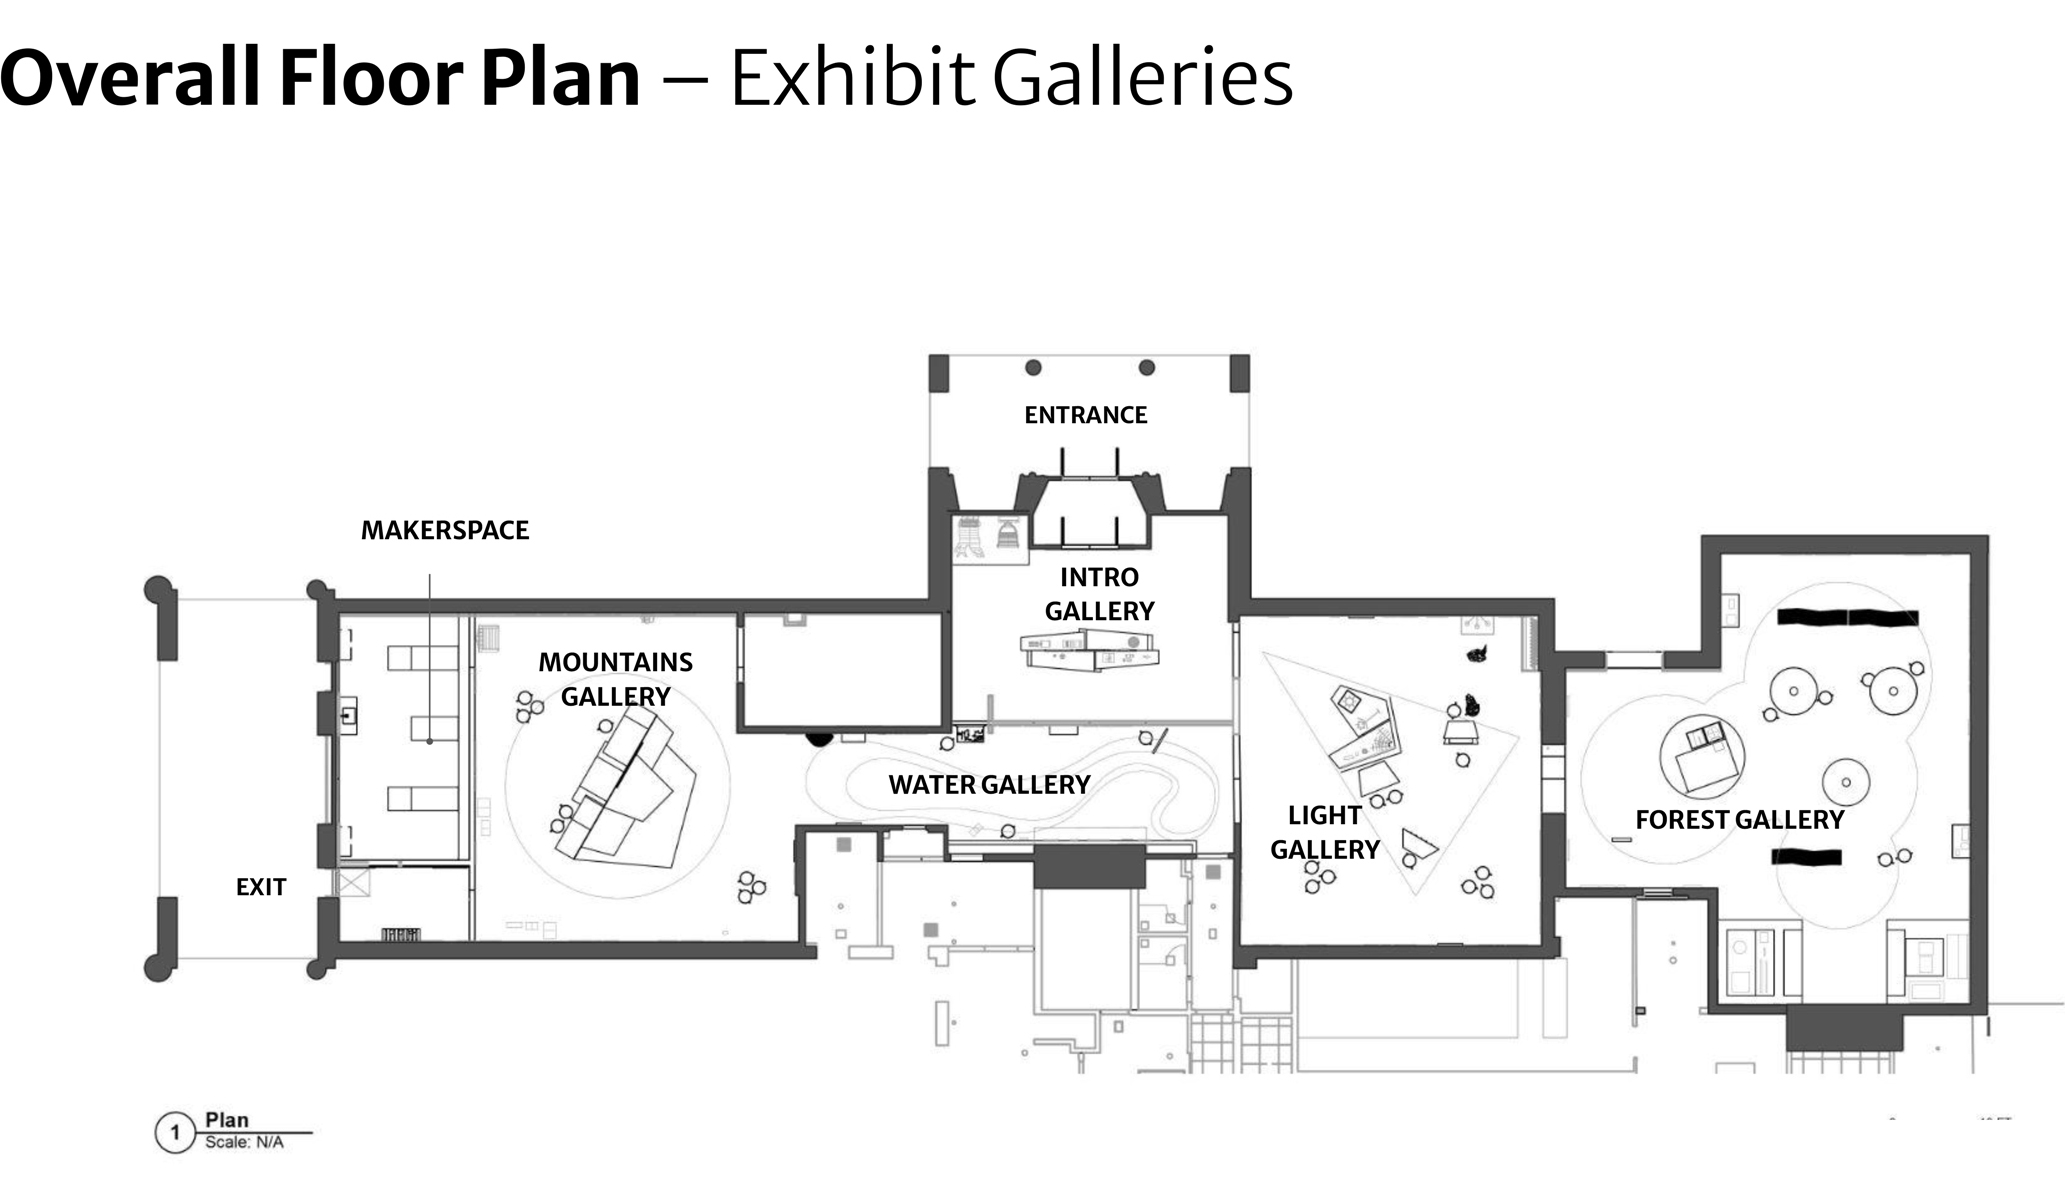 Black and white floor plan of the upcoming Artists & Inspiration in the Wild exhibit galleries.